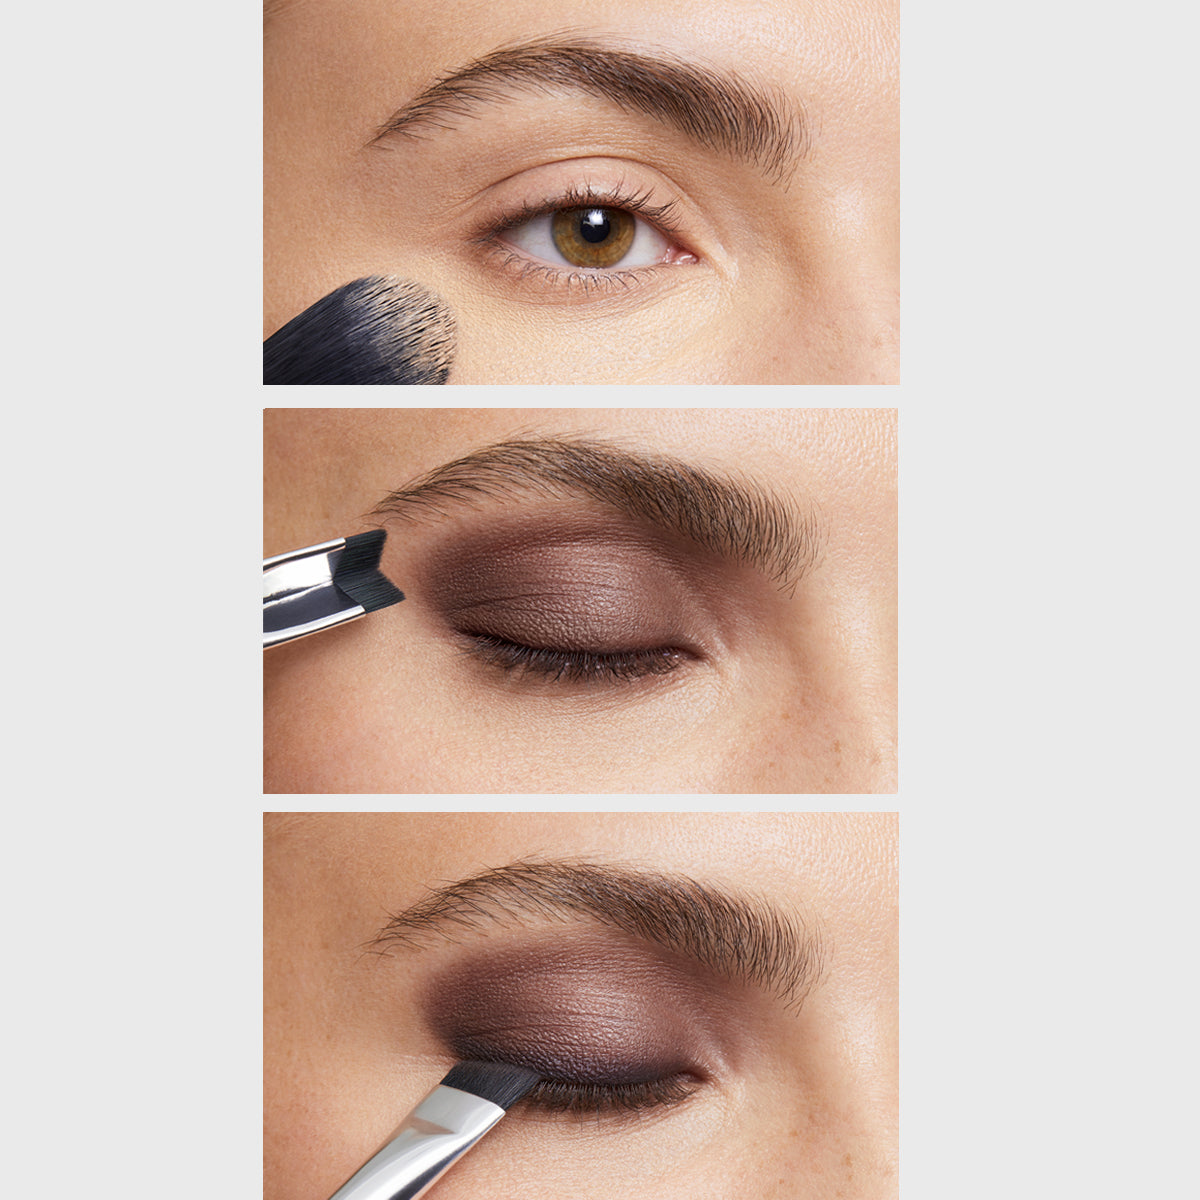 3 Steps to achieving the smokey eye using the Fold Out Eyes palette and Corner brush